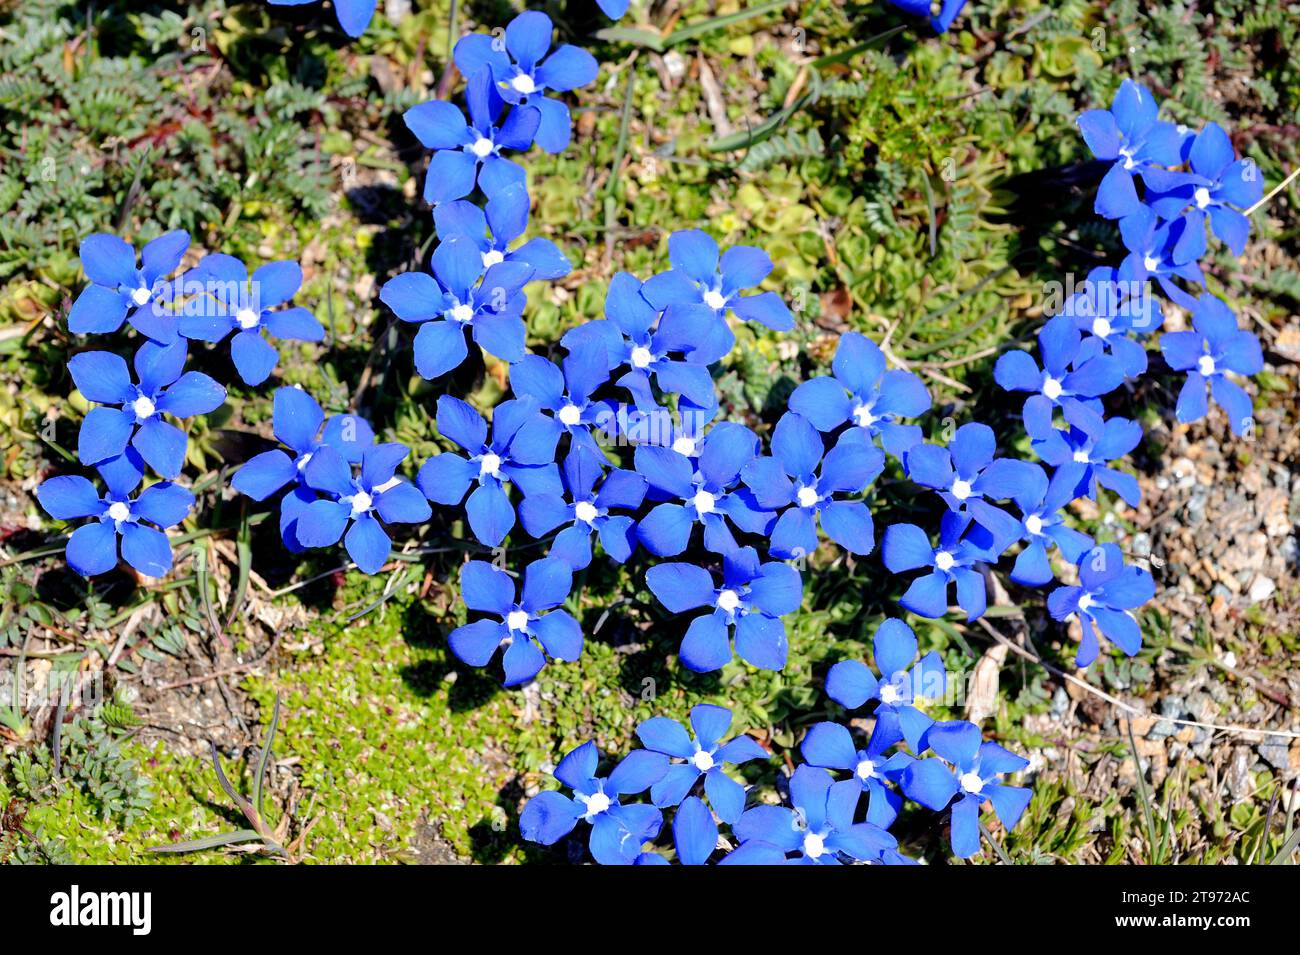 Short-leaved gentian (Gentiana brachyphylla or Gentiana verna brachyphylla) is a herb native to Alps and Pyrenees. This photo was taken in Swiss Alps. Stock Photo